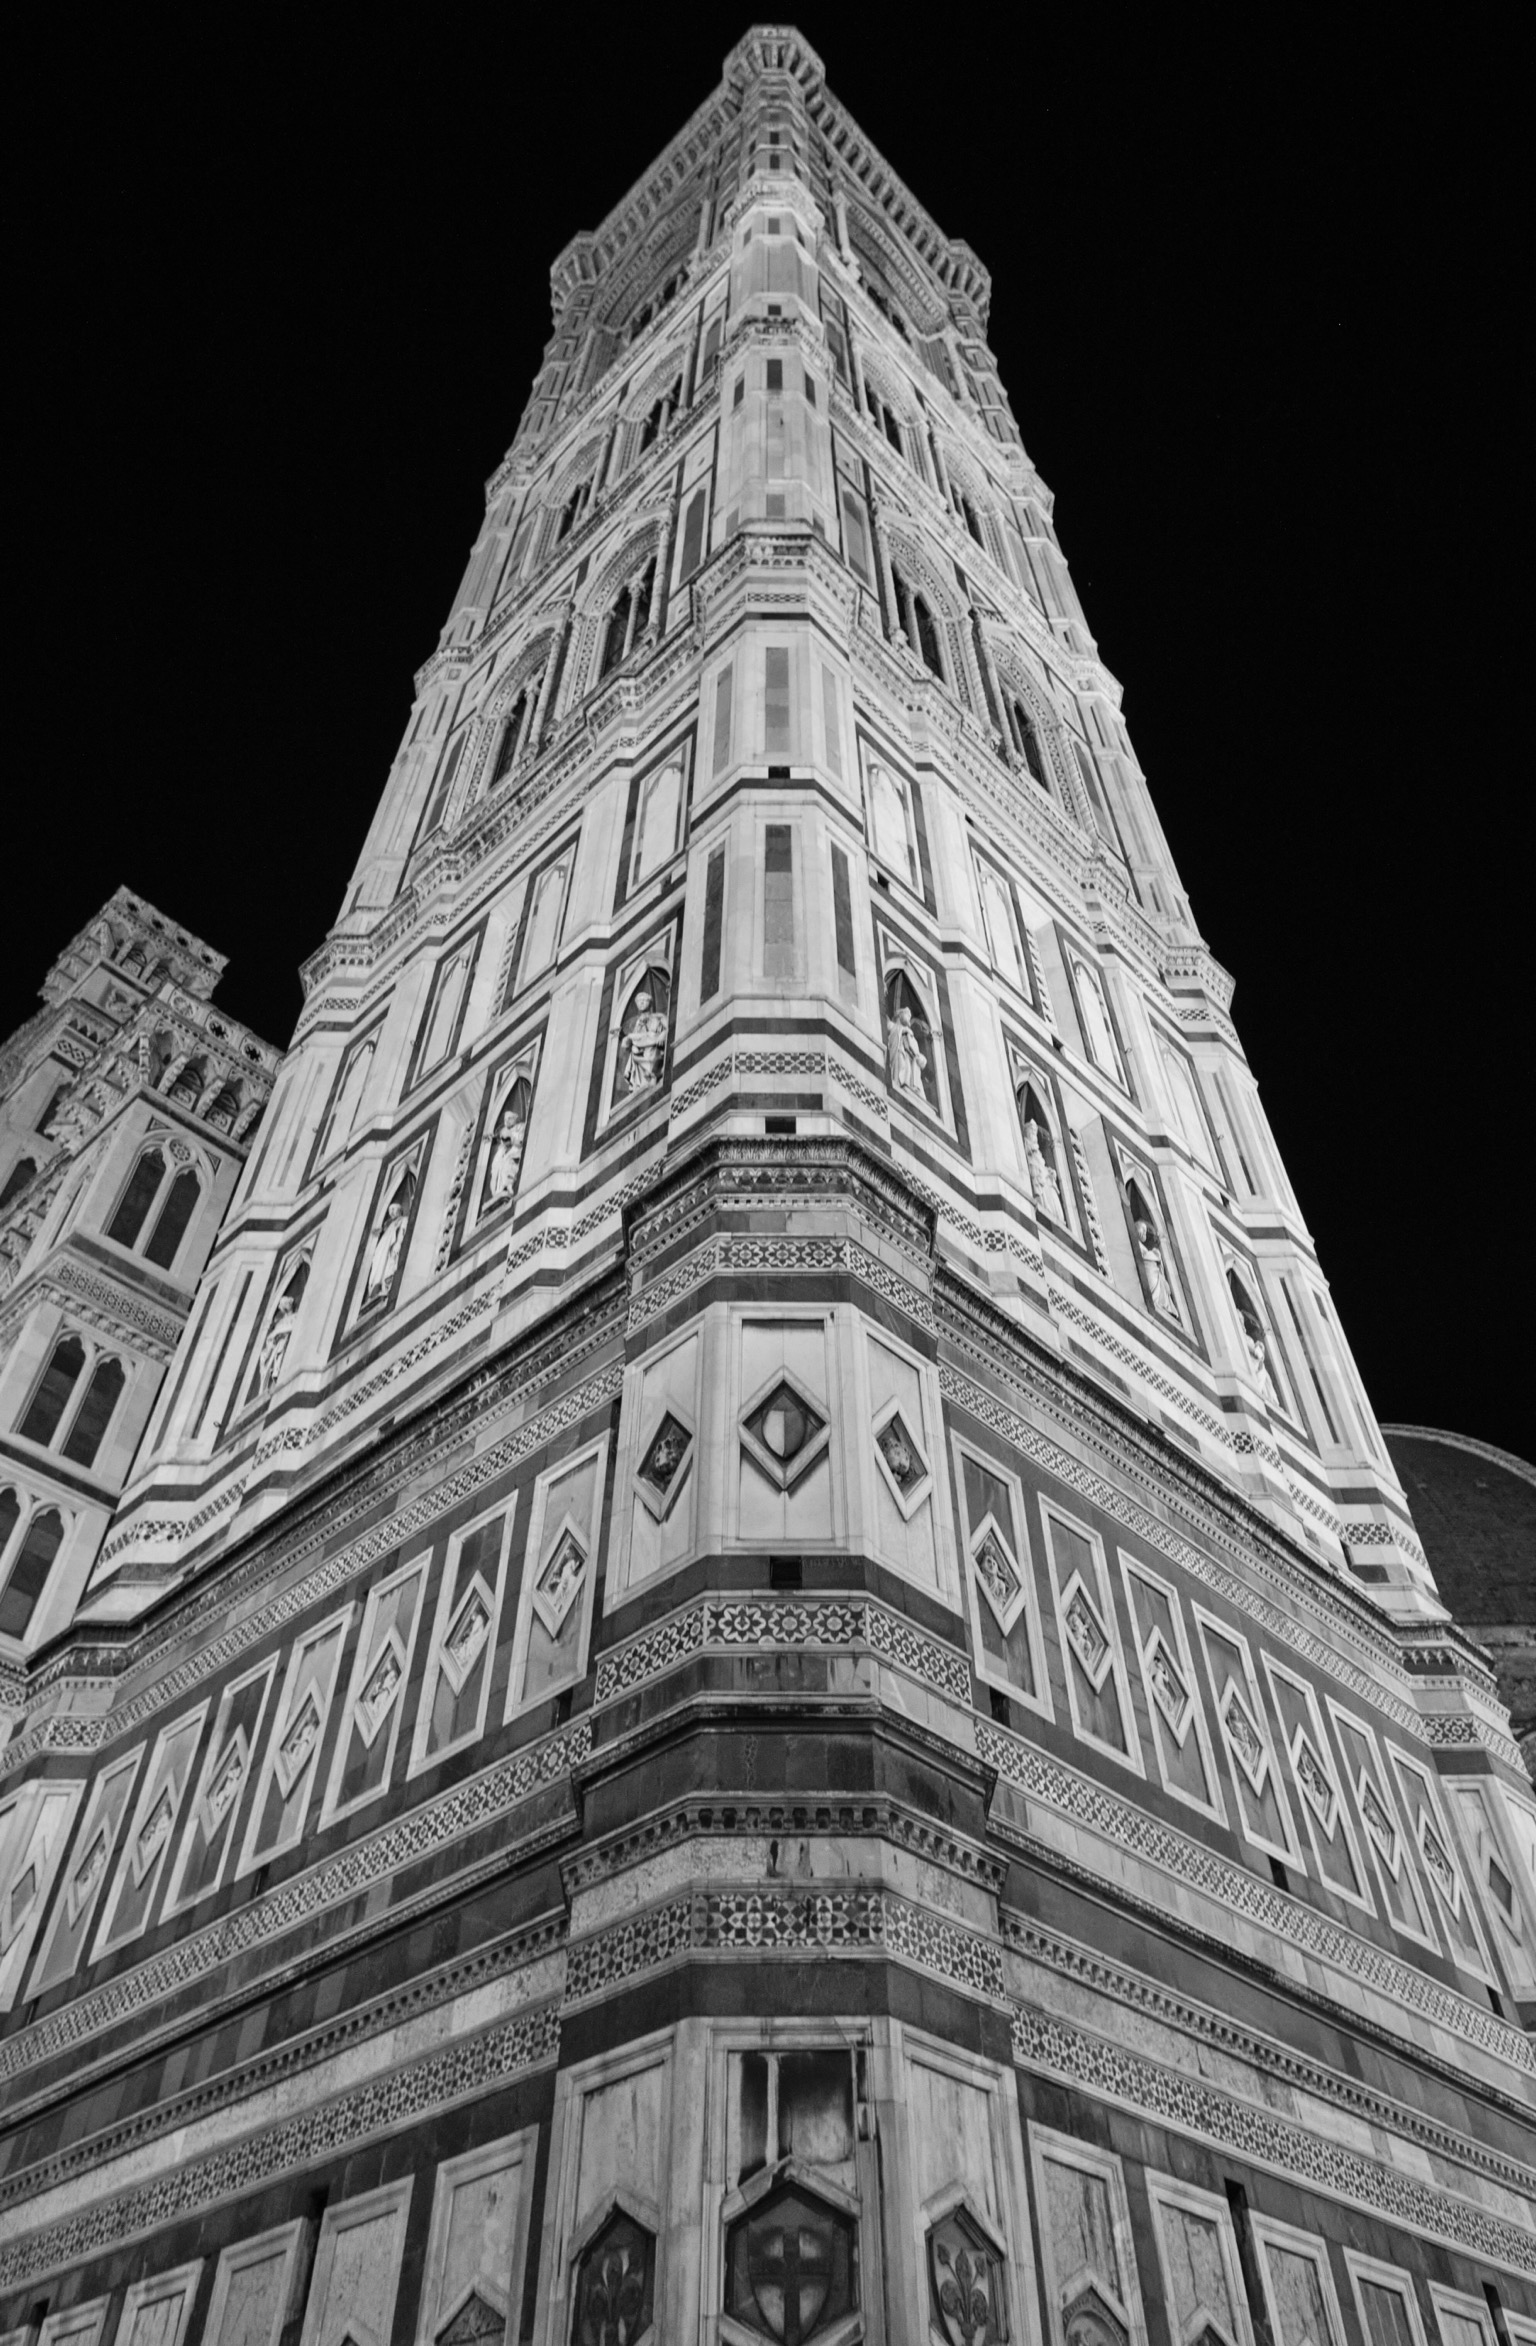 Giotto's bell tower...